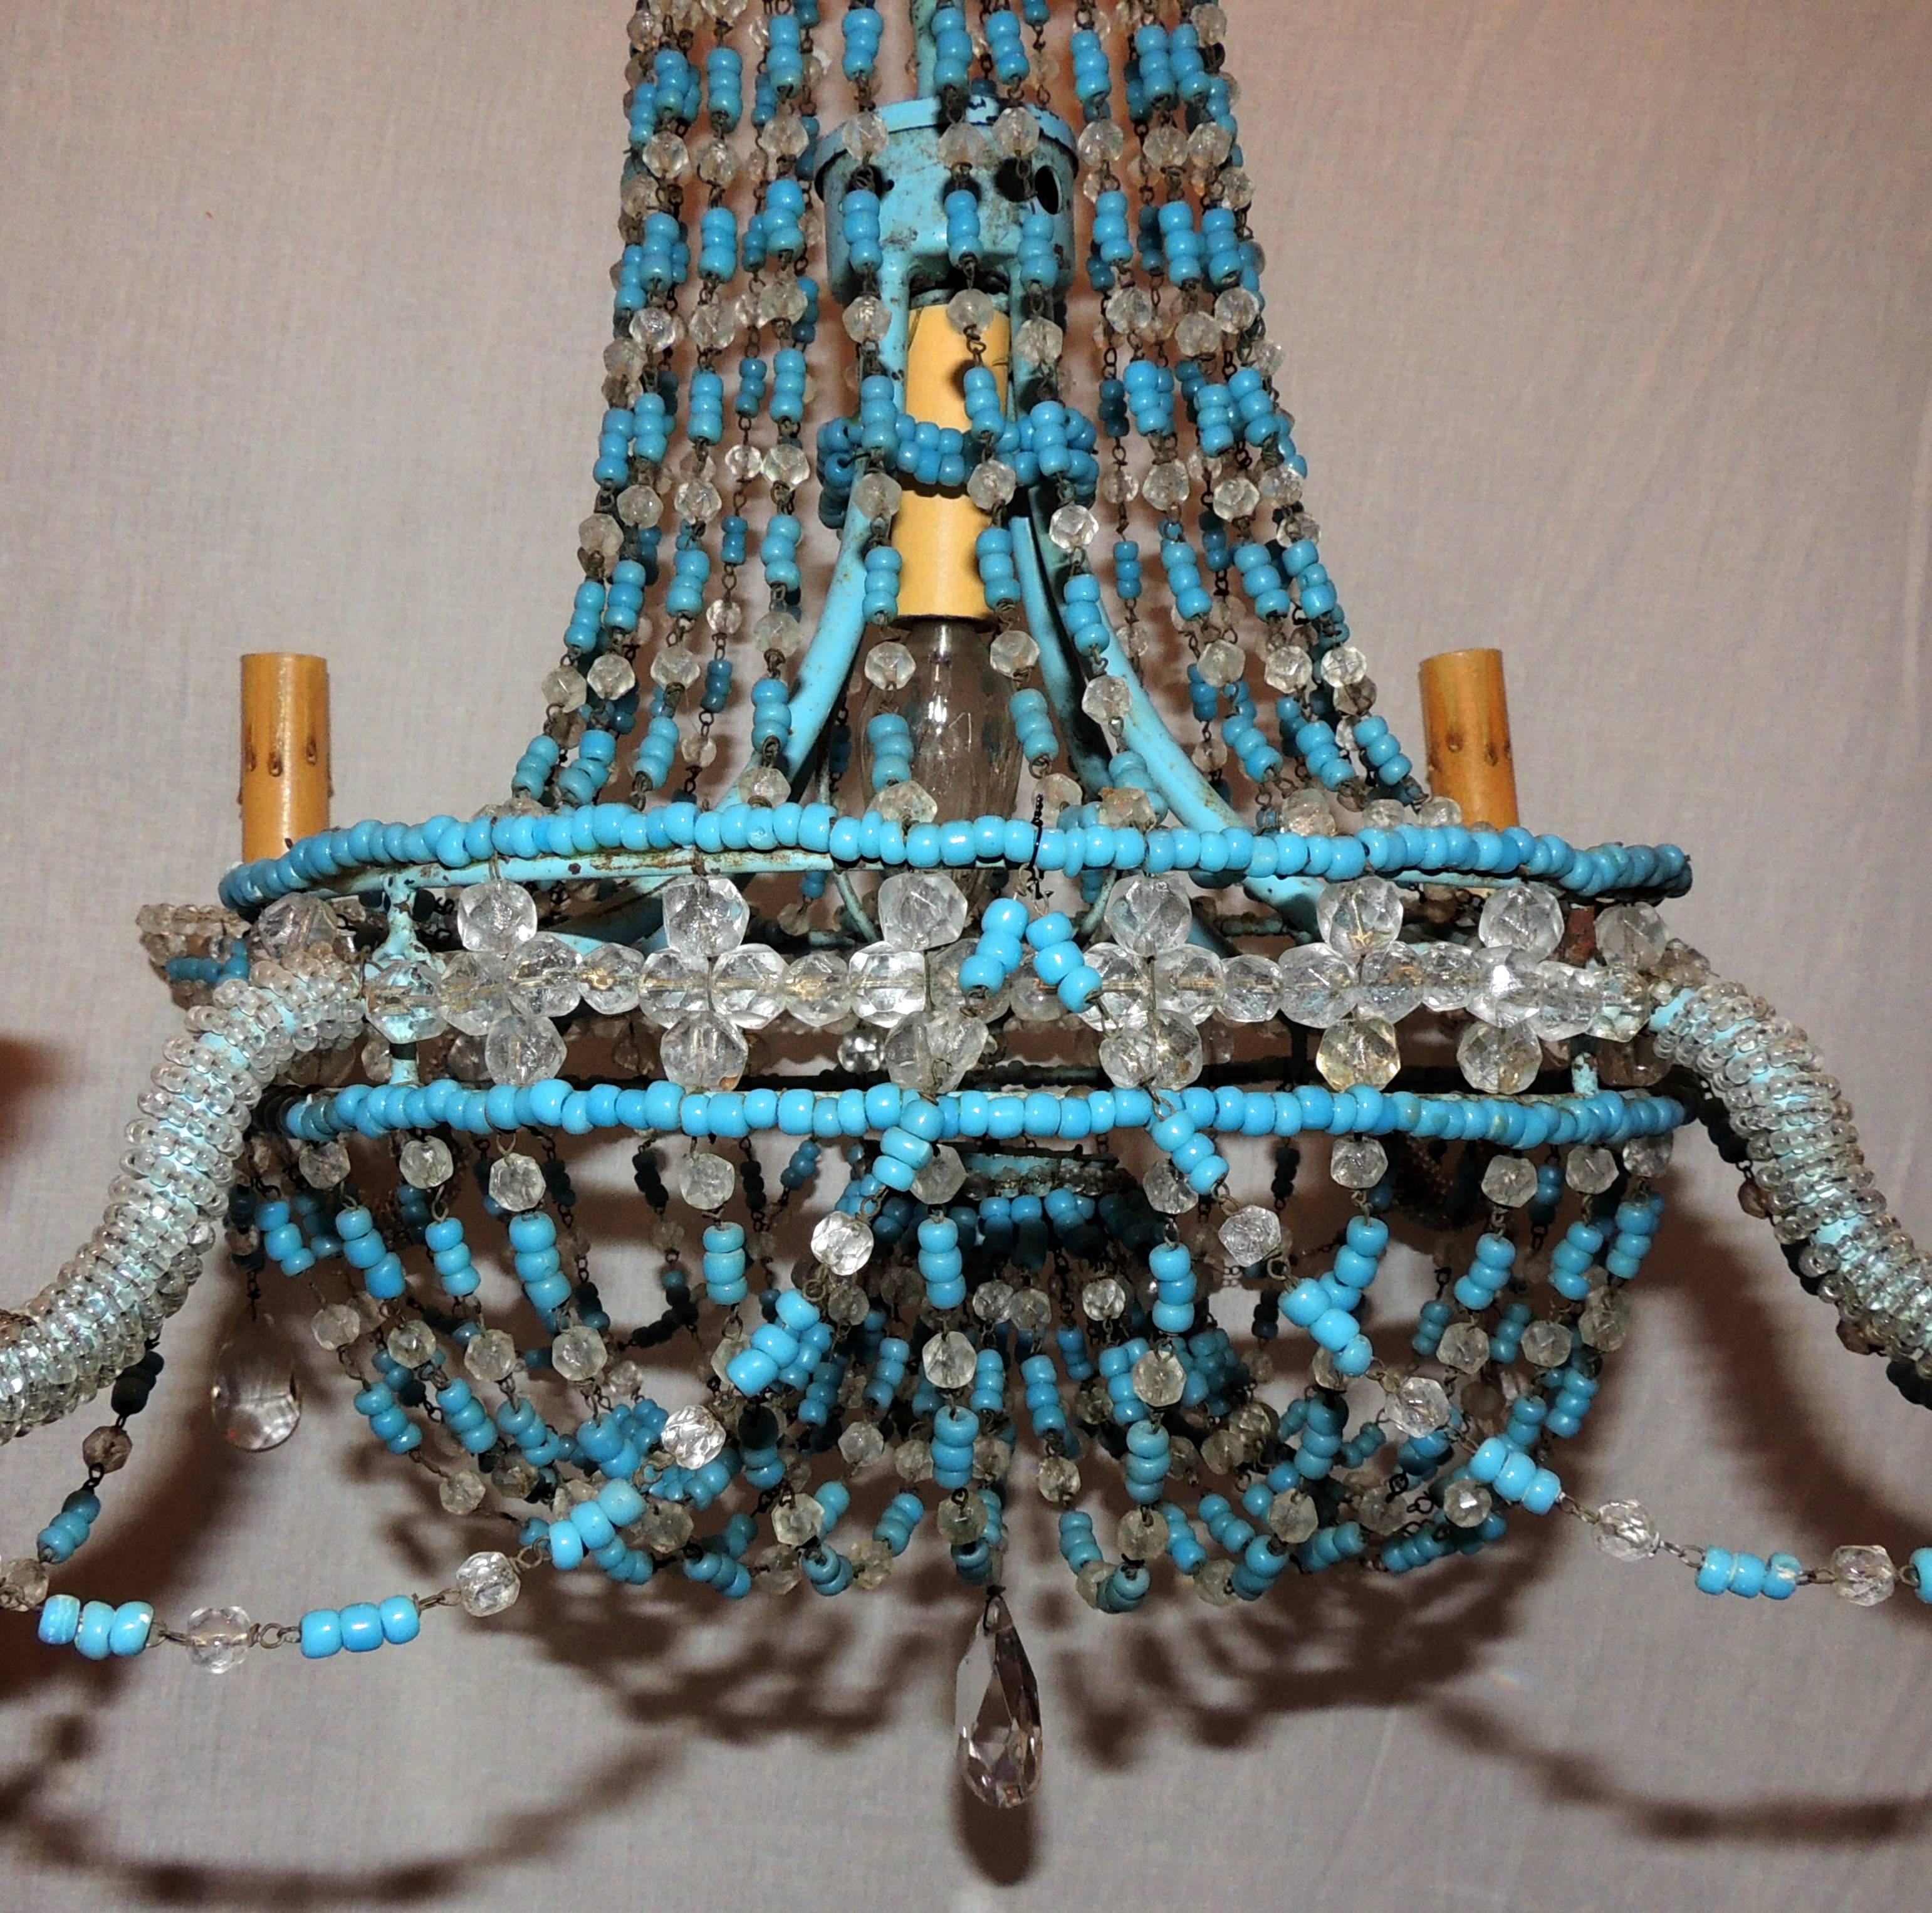 A wonderful pair of vintage turquoise beaded and crystal basket swag chandeliers made in Italy with 4 lights on the arms and one in the center of the fixture.